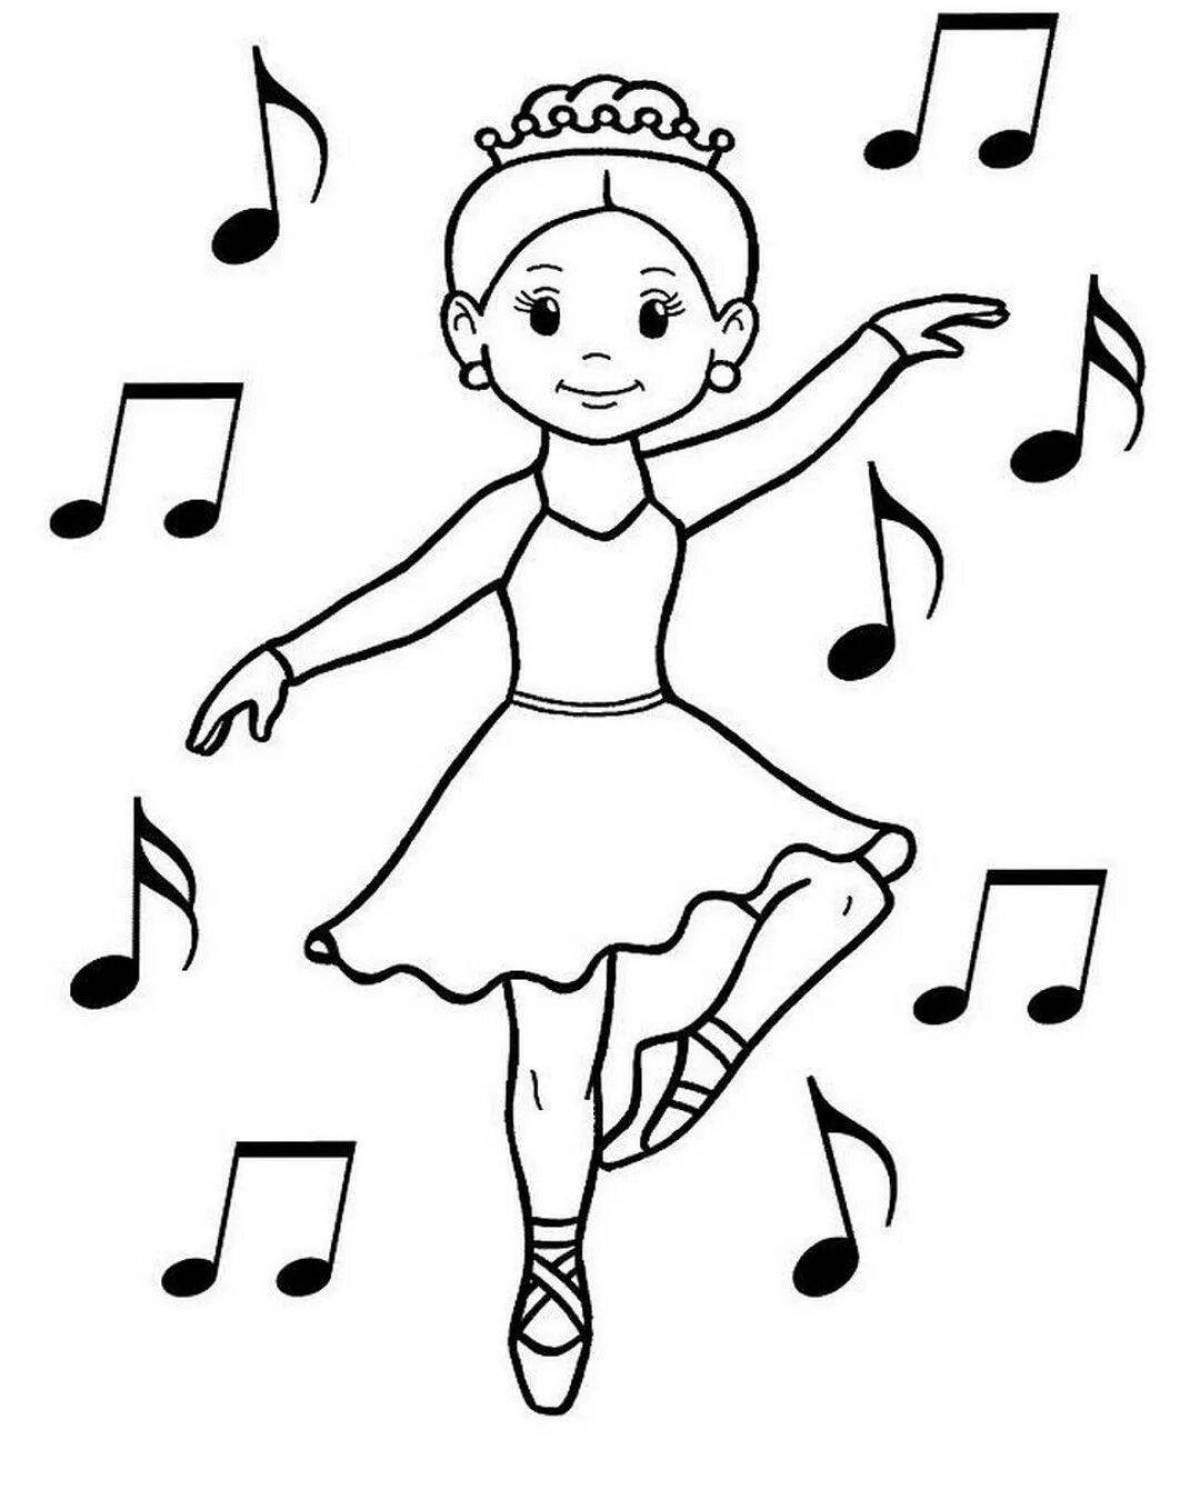 Bright dance coloring for kids